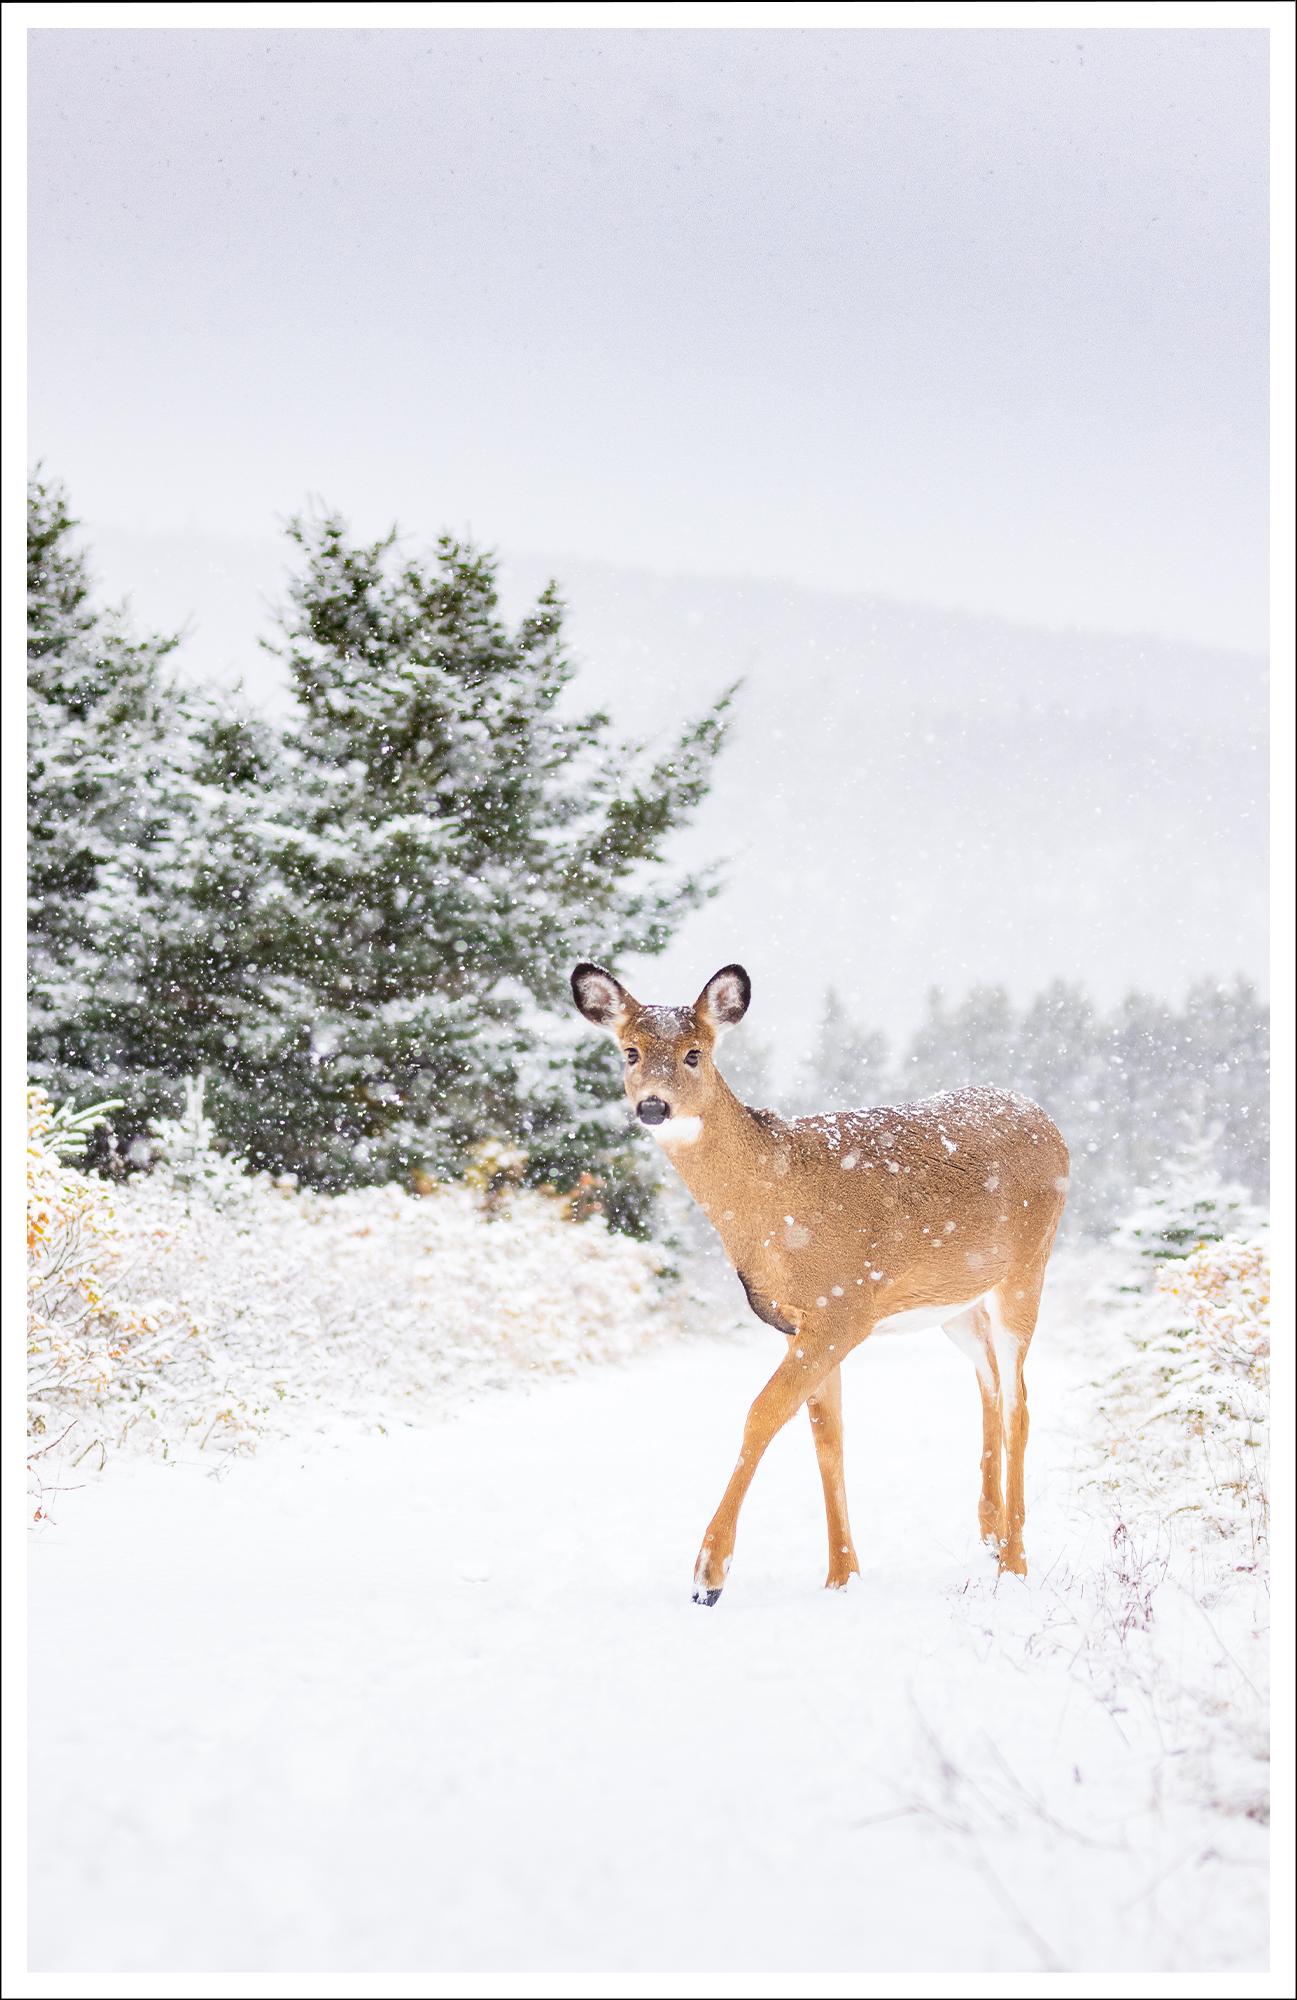 Under the snowflakes - Greeting Card